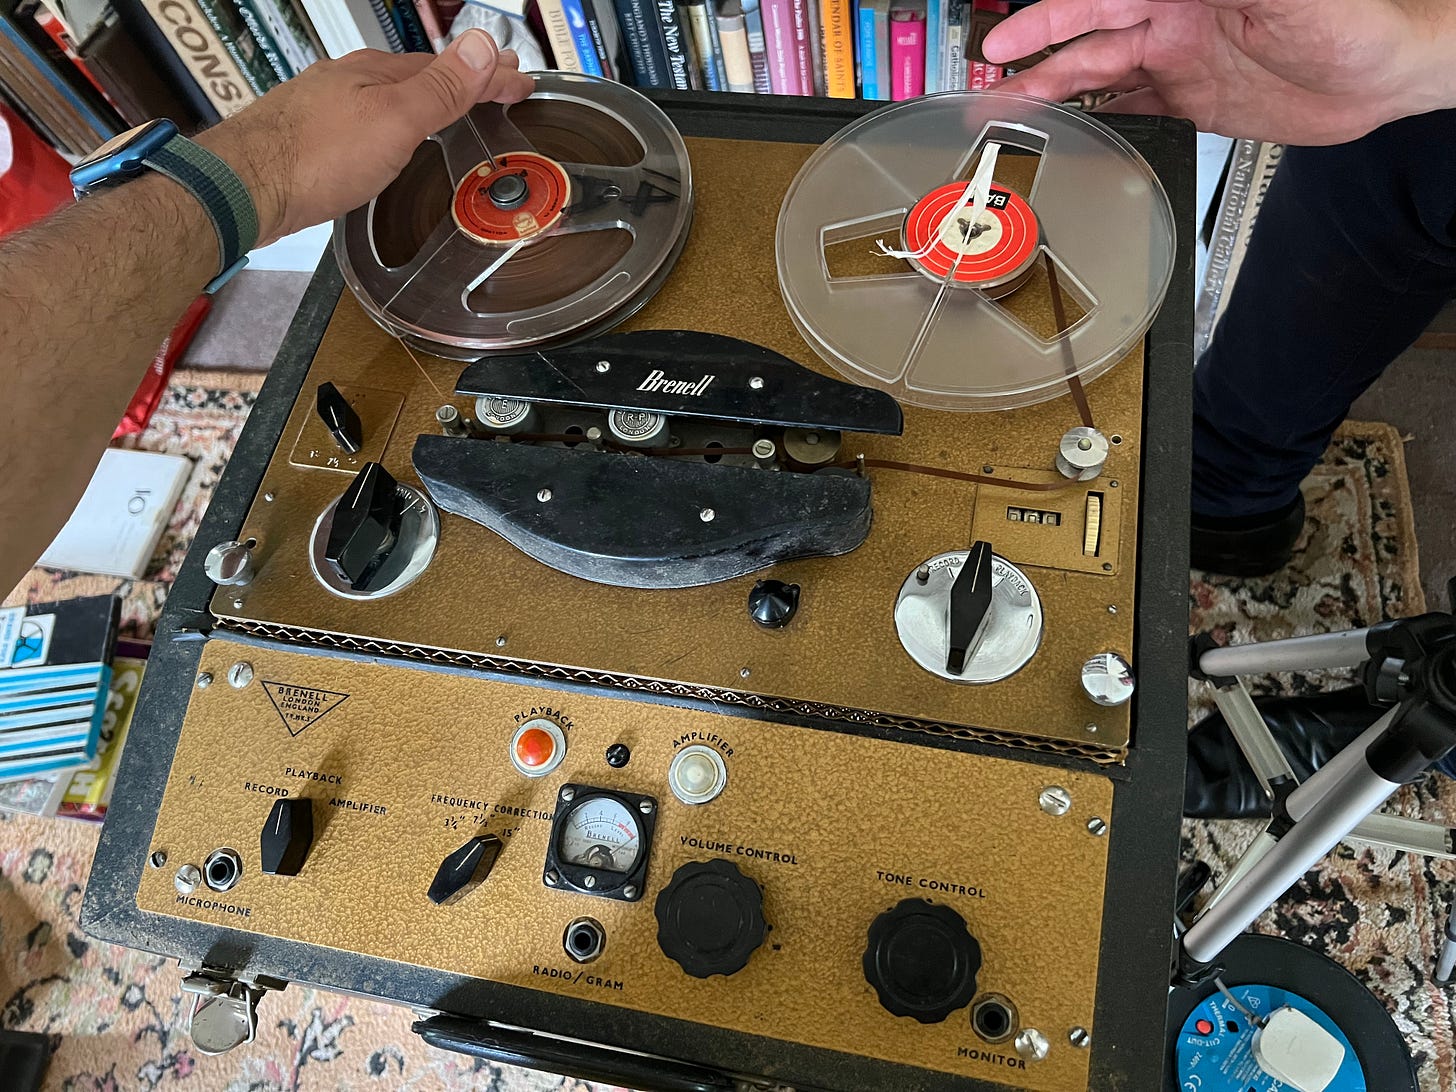 A photo of a reel to reel tape recorder with people manually winding tape